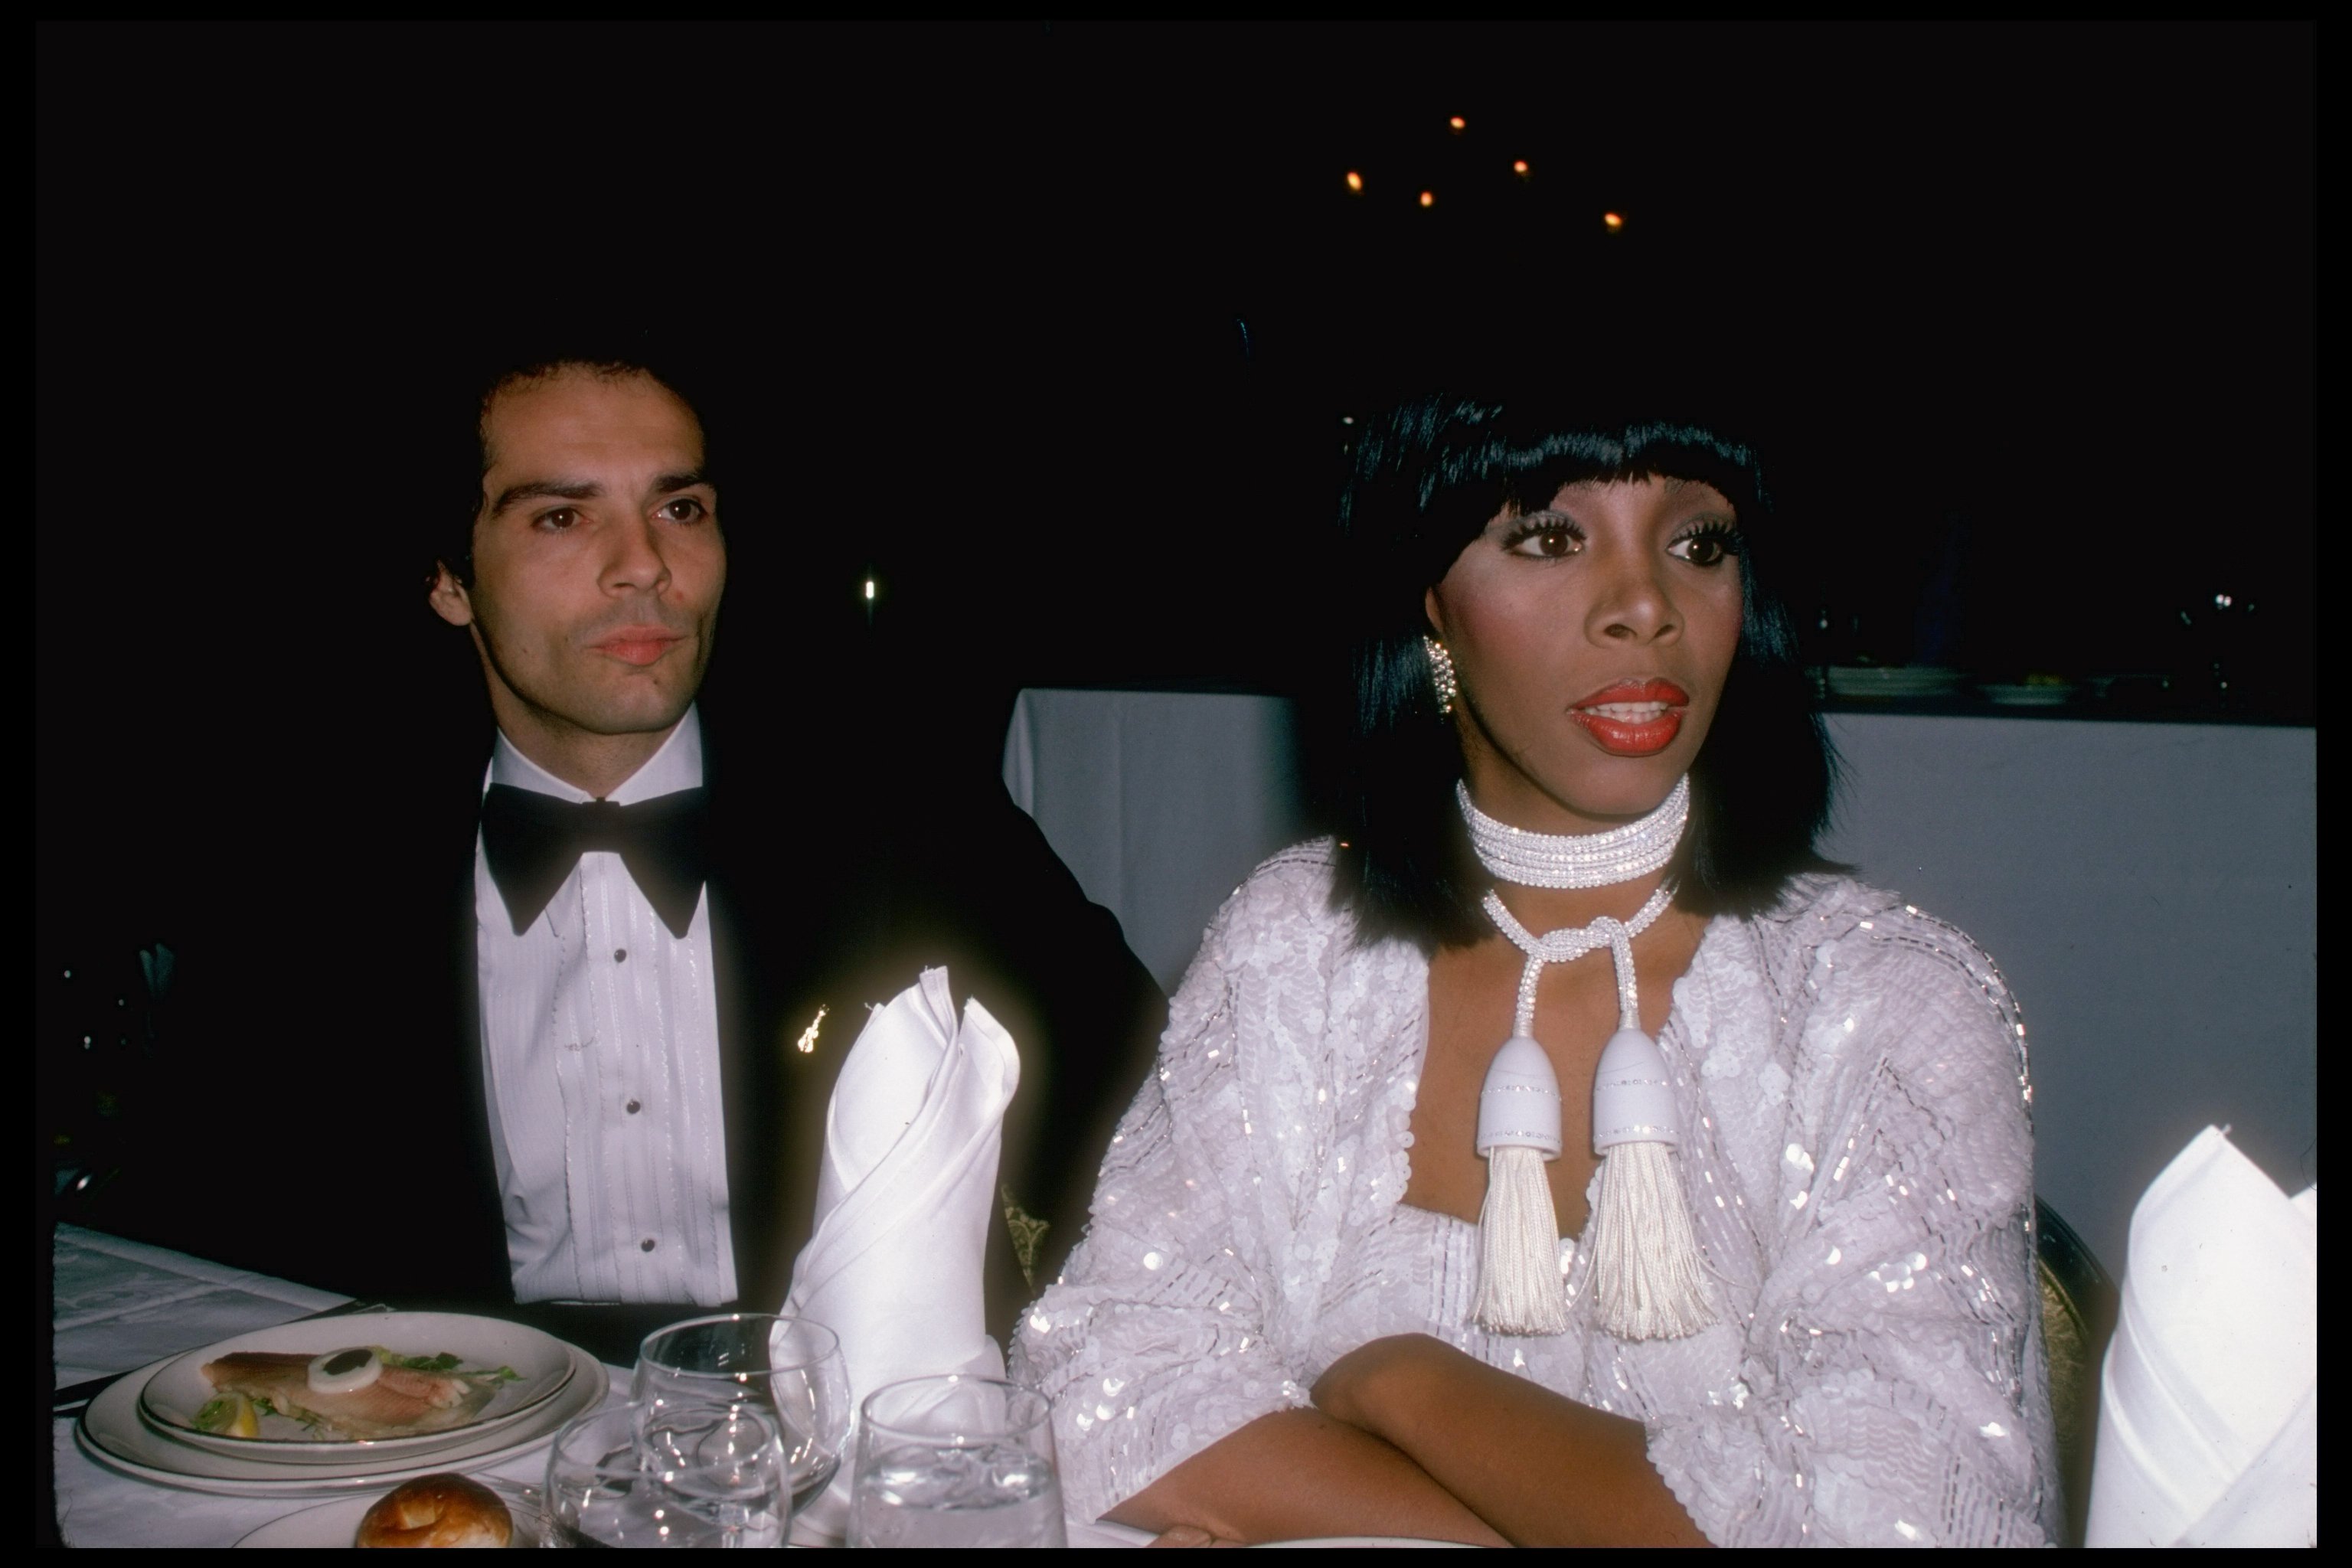 Singer Donna Summer with husband, singer Bruce Sudano | Source: Getty Images